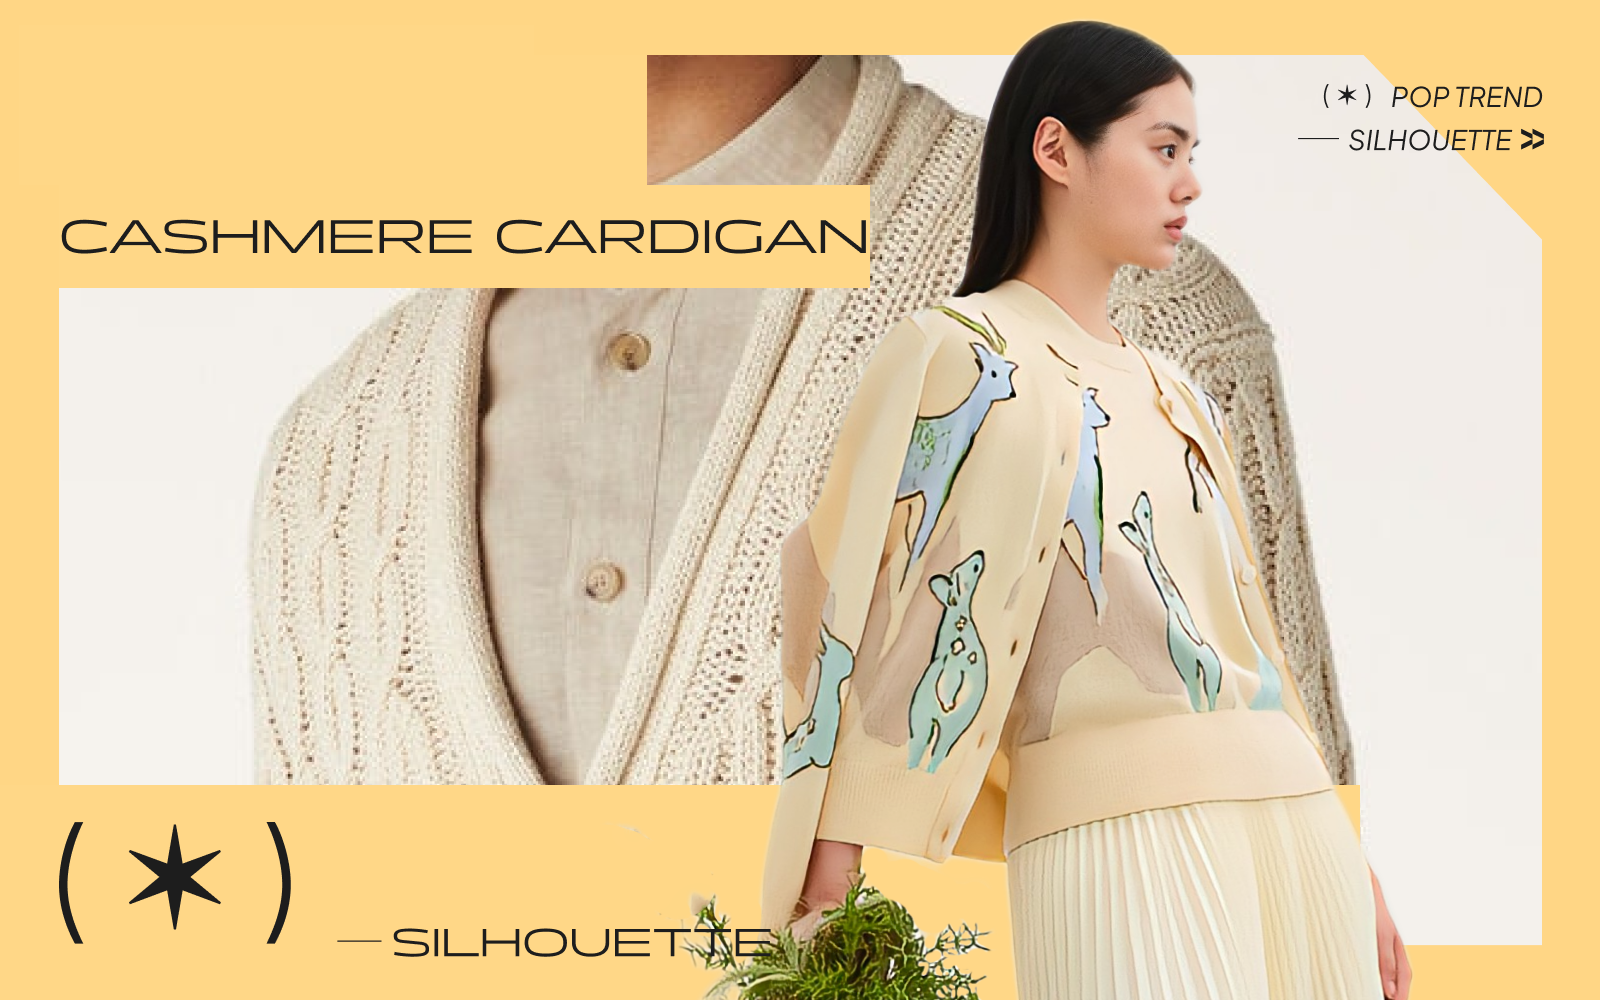 Cashmere Cardigan -- The Silhouette Trend for Knitwear